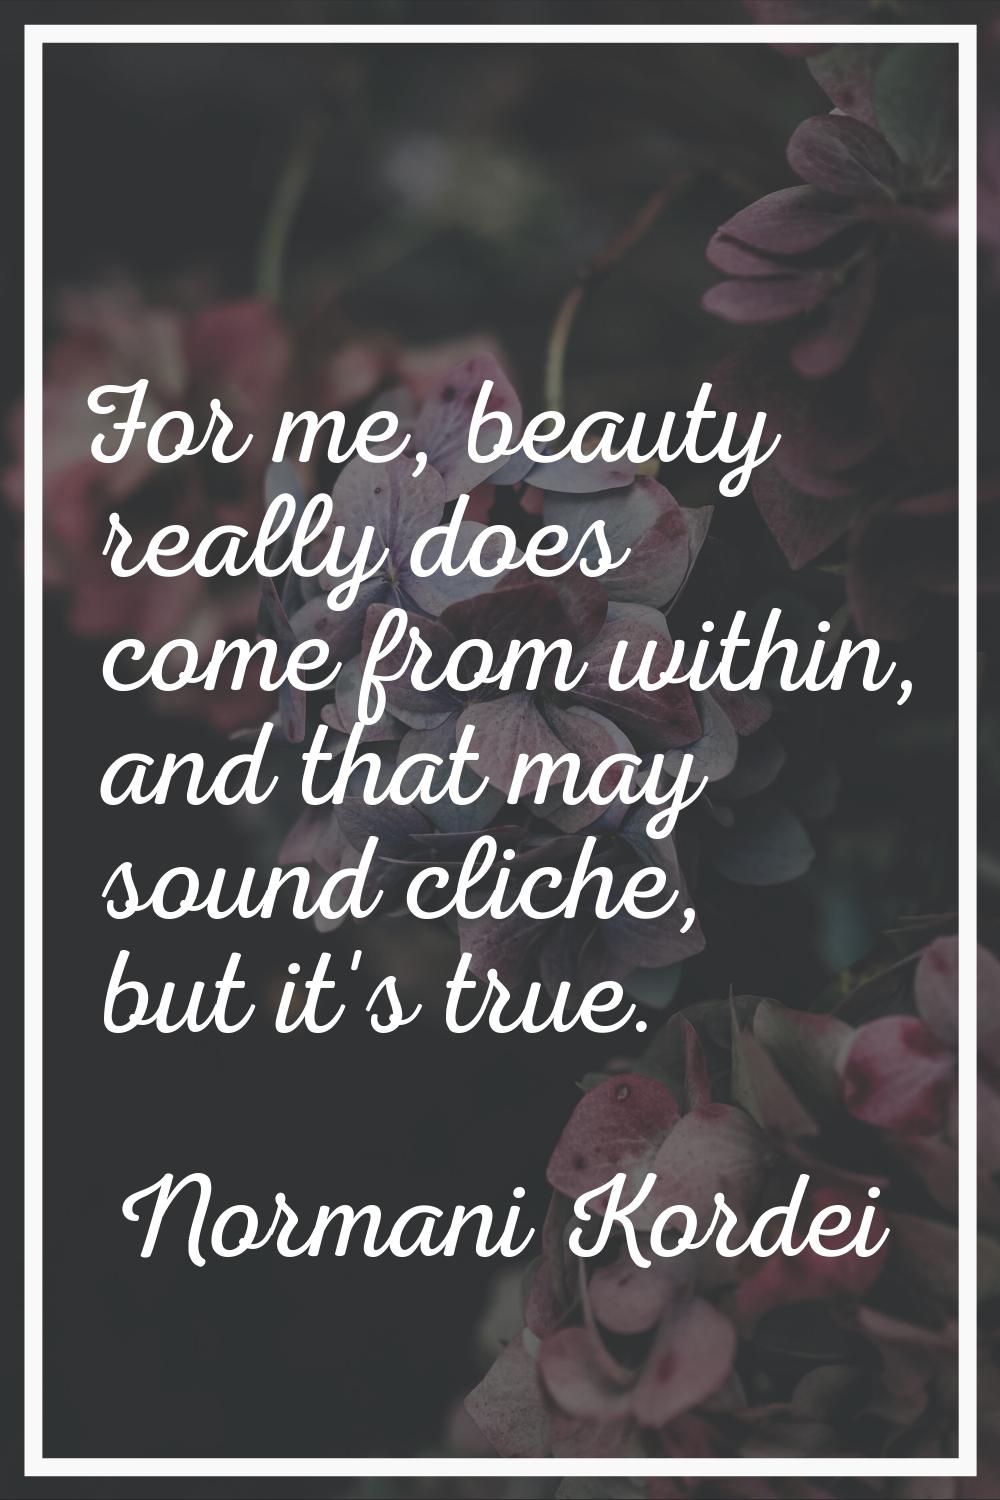 For me, beauty really does come from within, and that may sound cliche, but it's true.